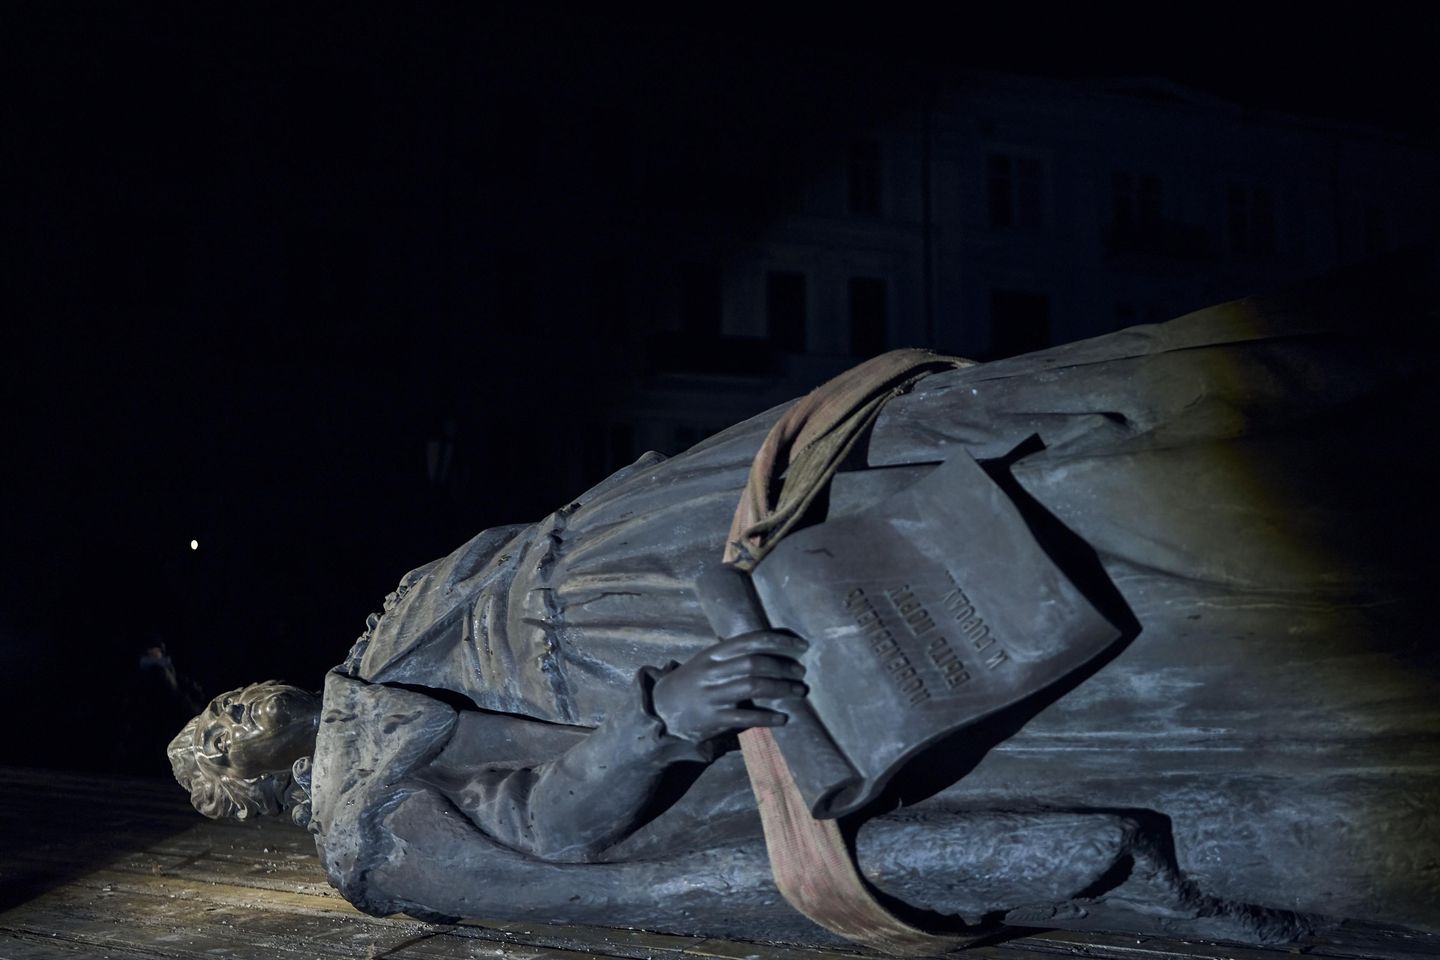 Statue of former Russian ruler pulled down in Ukraine